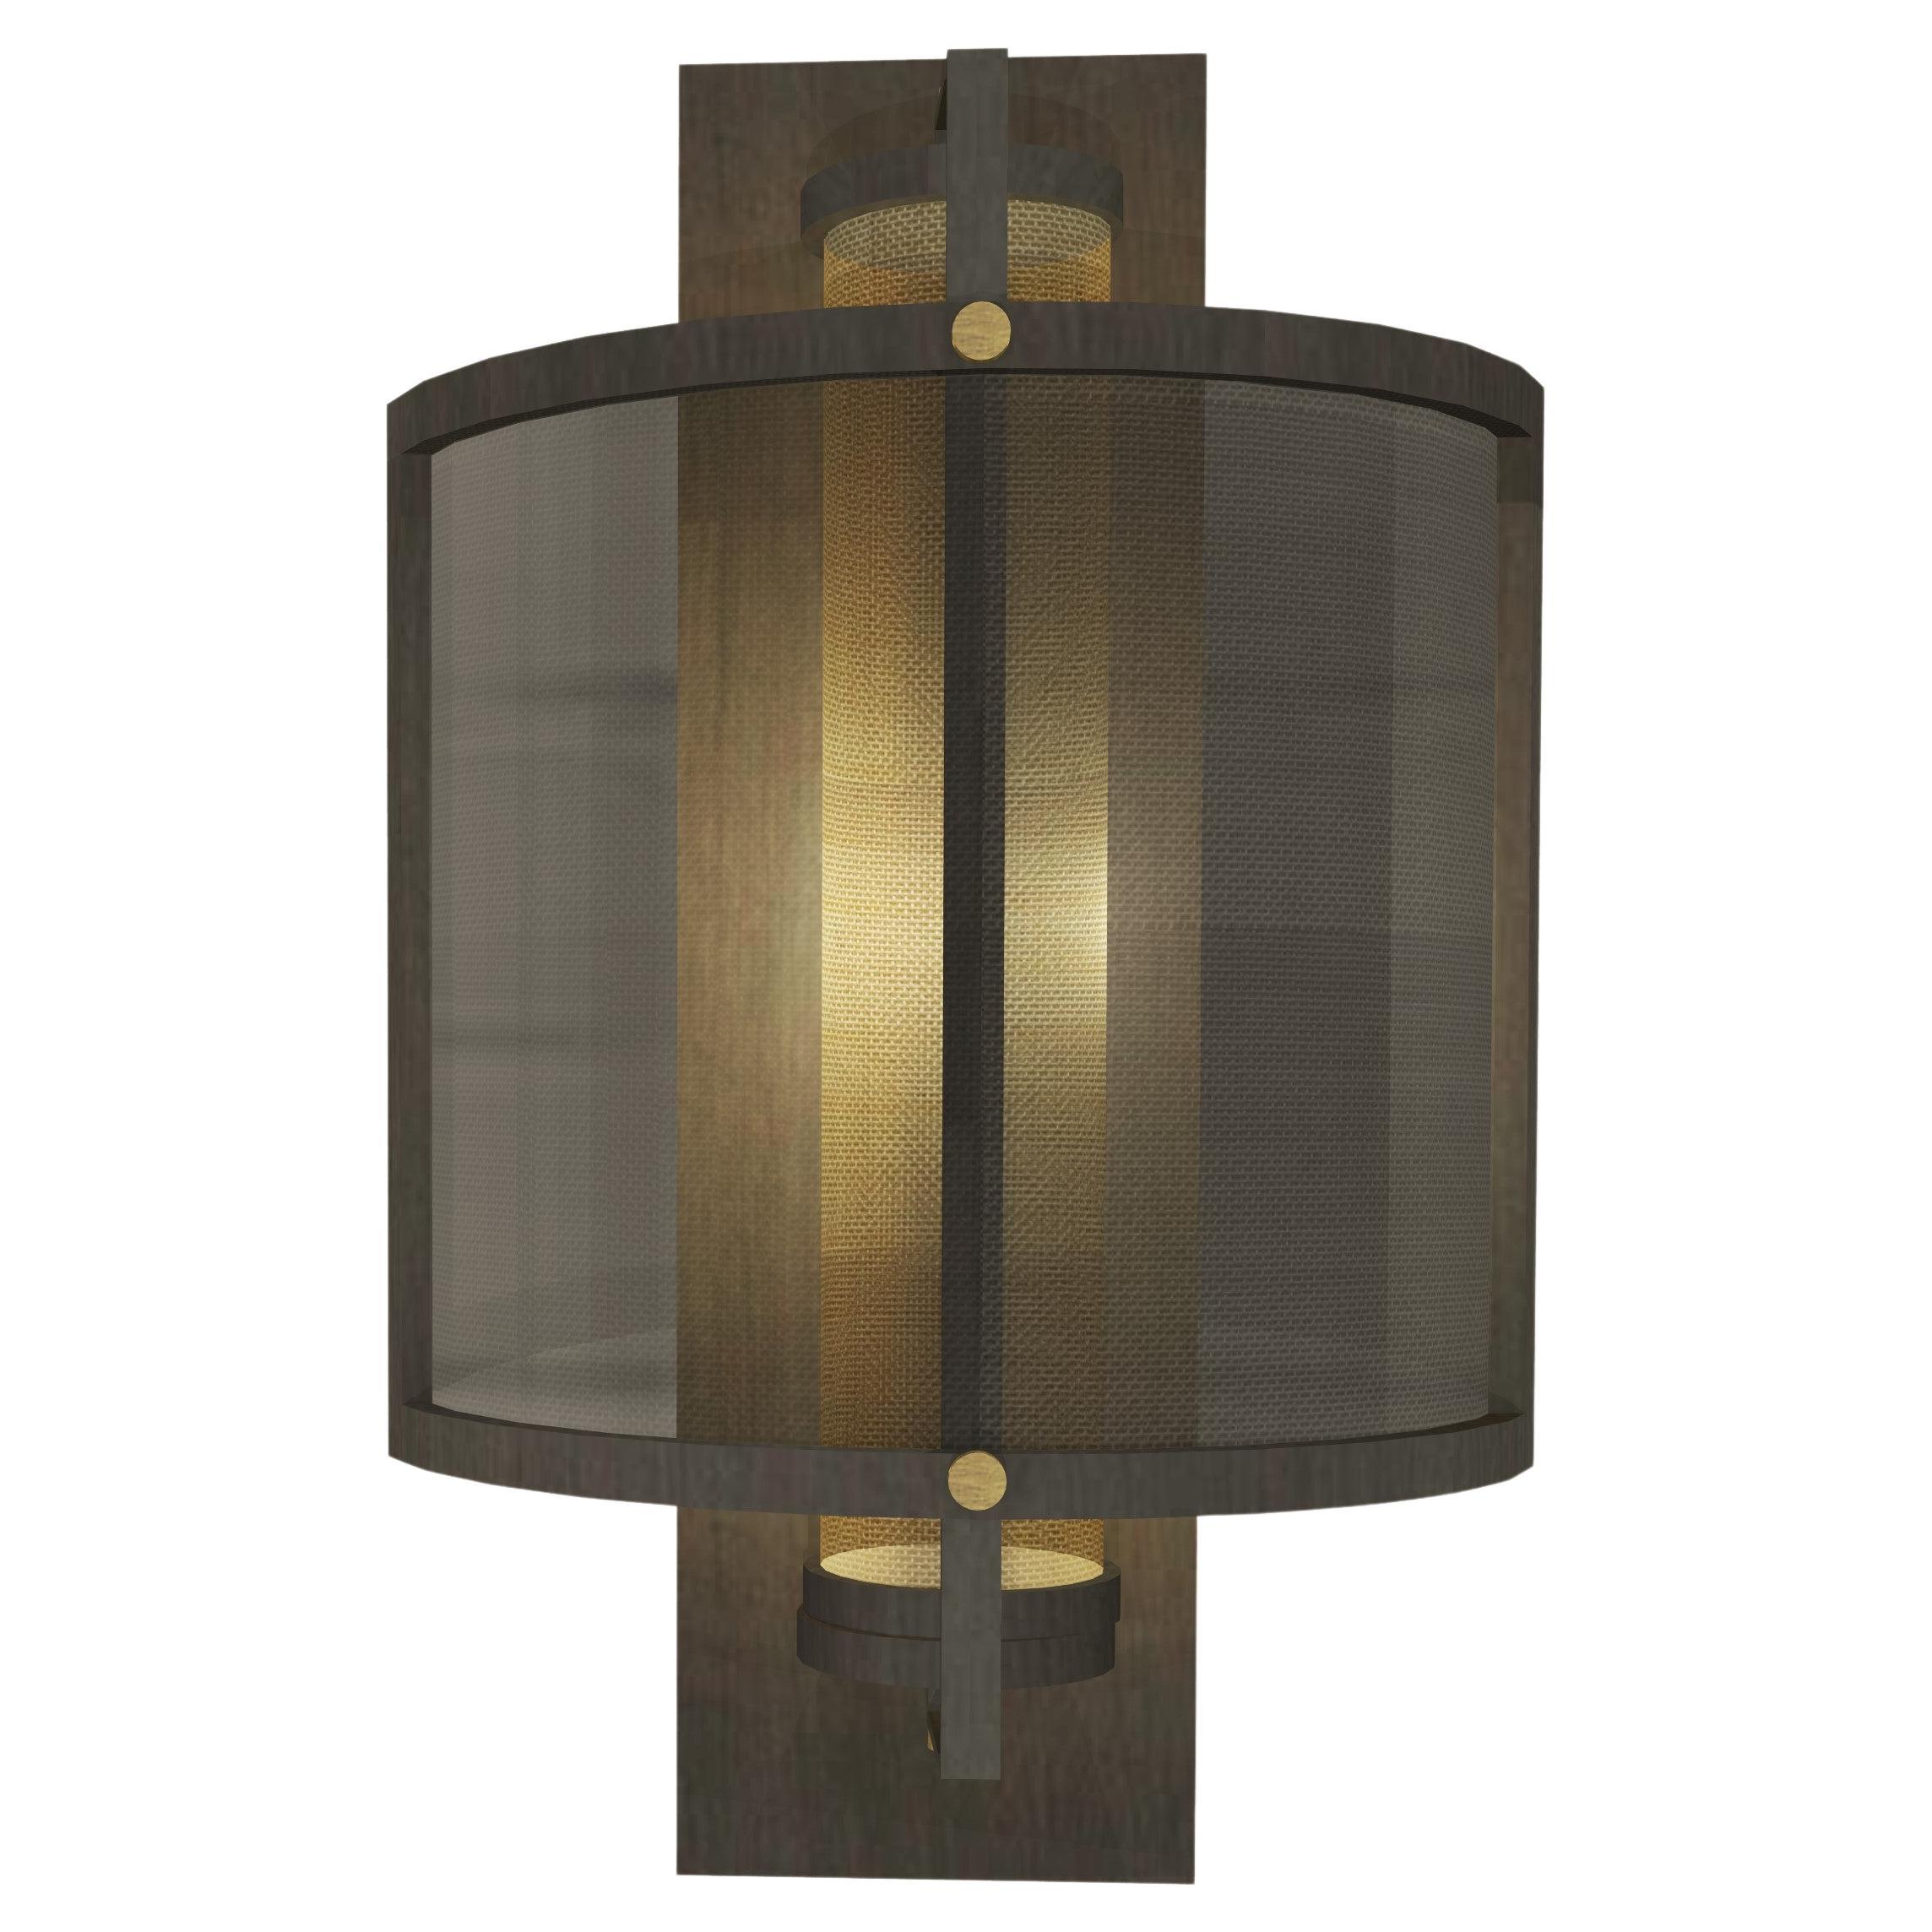 Imagin Industrial Wall Light in Antique Bronze and Antique Brass